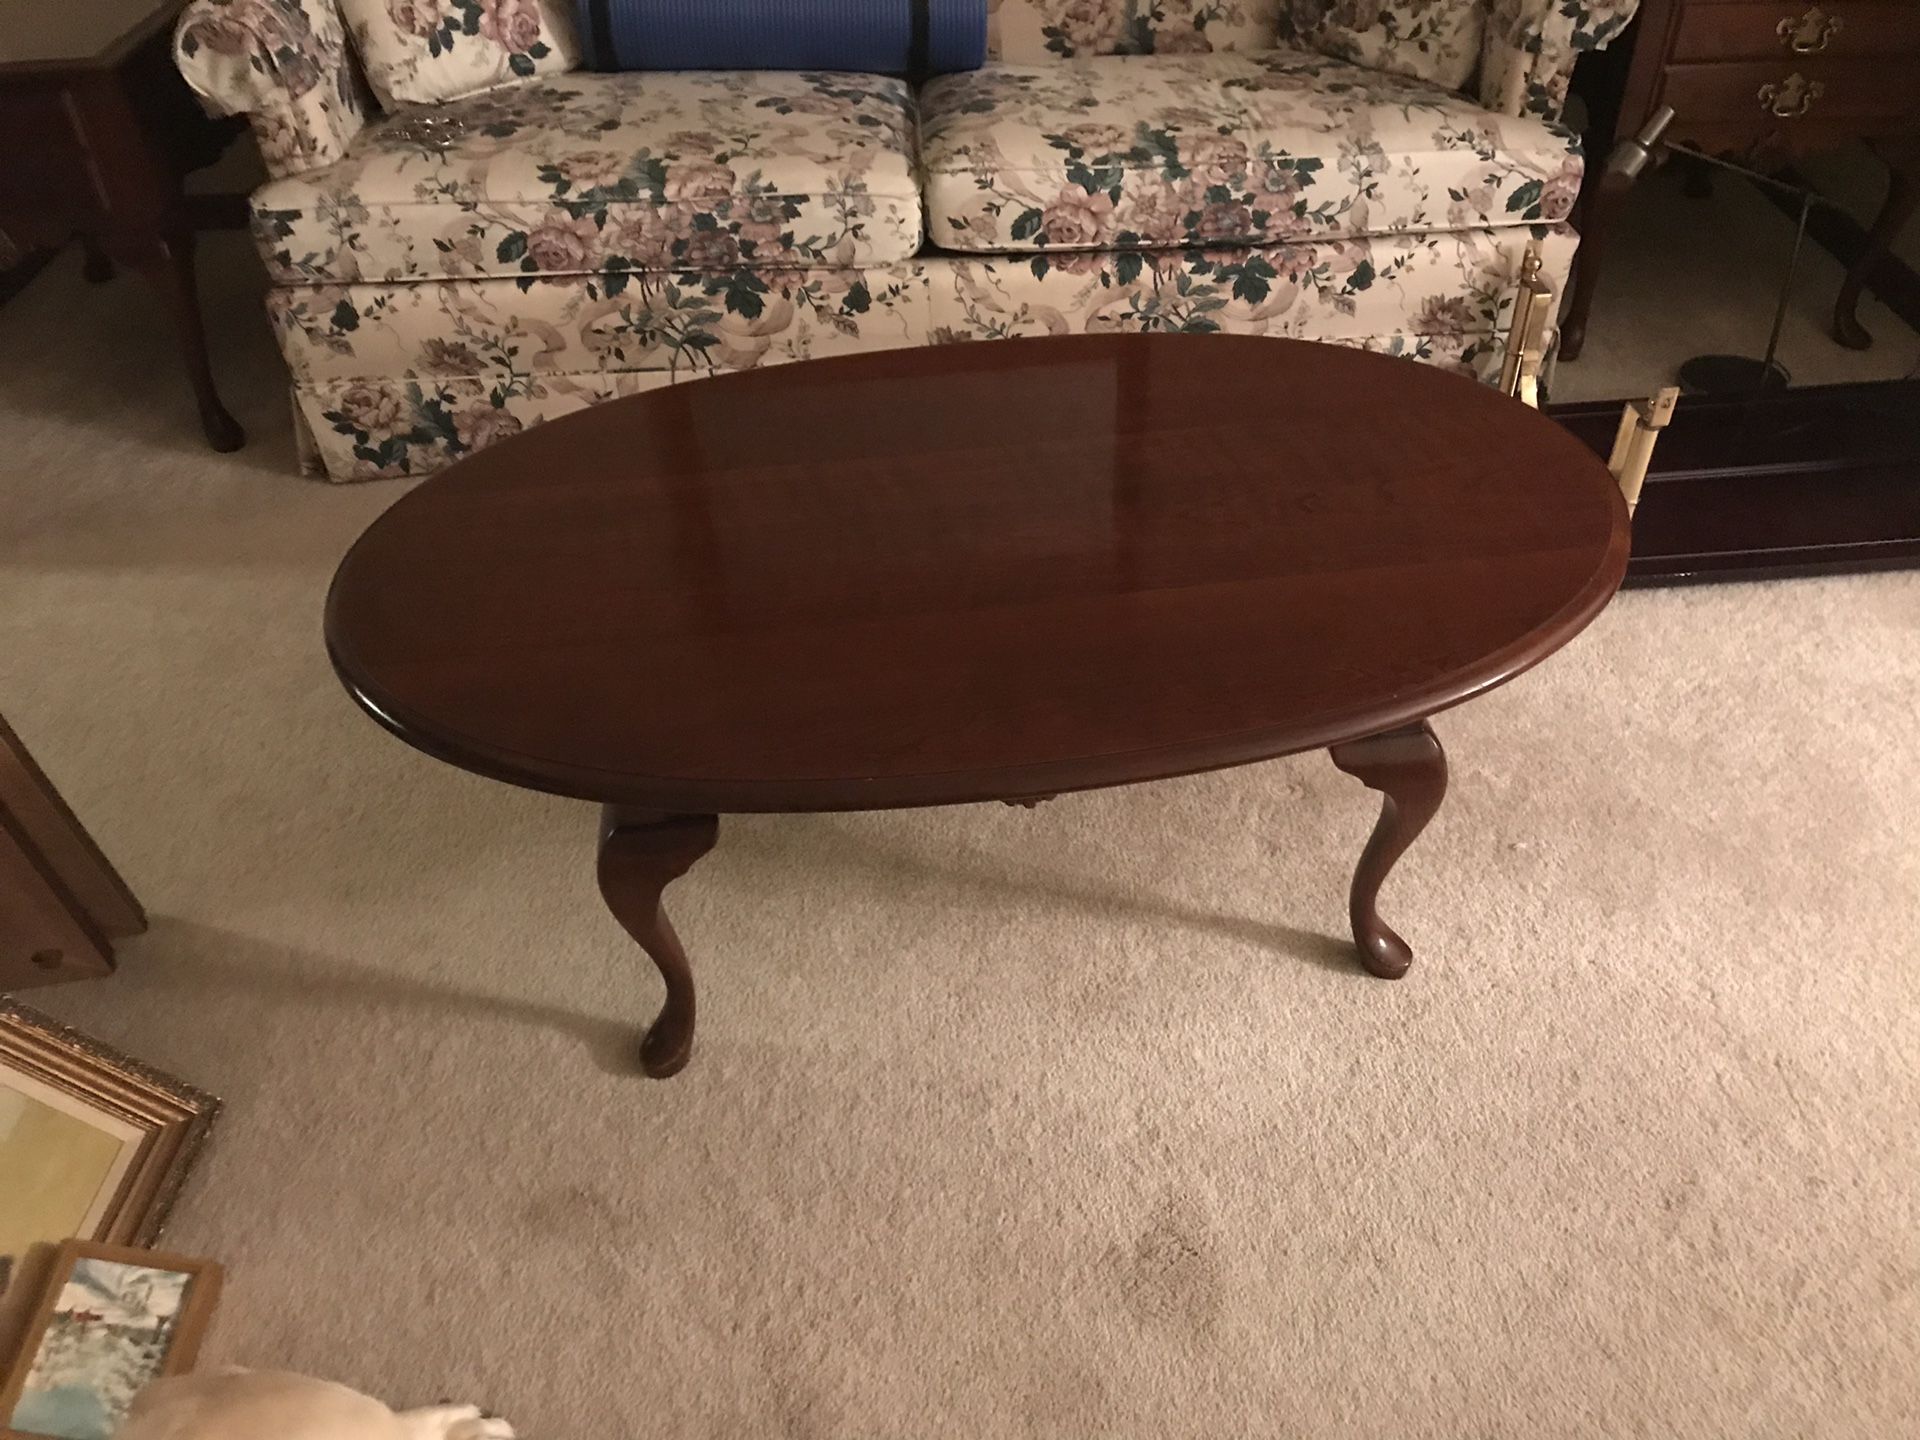 Cherry Oval Coffee Table & End tables- one drawer (Thomasville?)